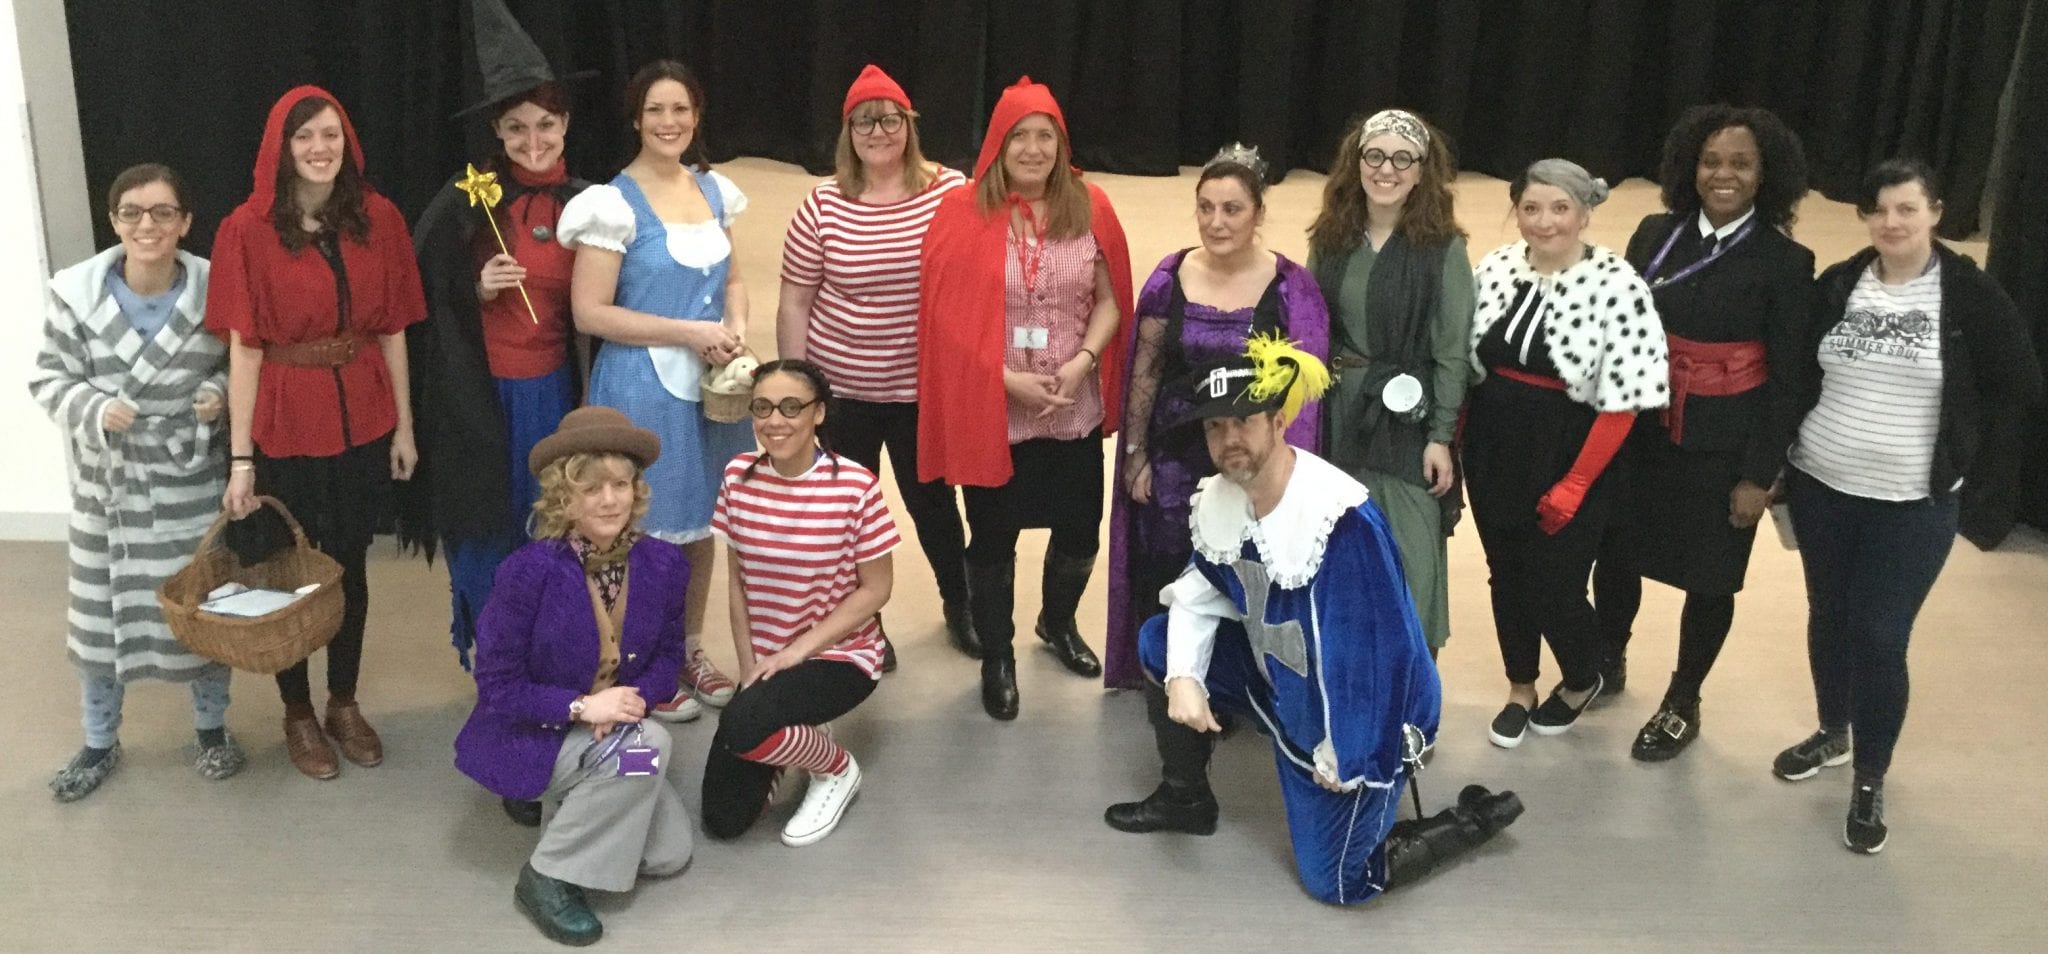 Our East Academy staff dress-up for World Book Day 2018